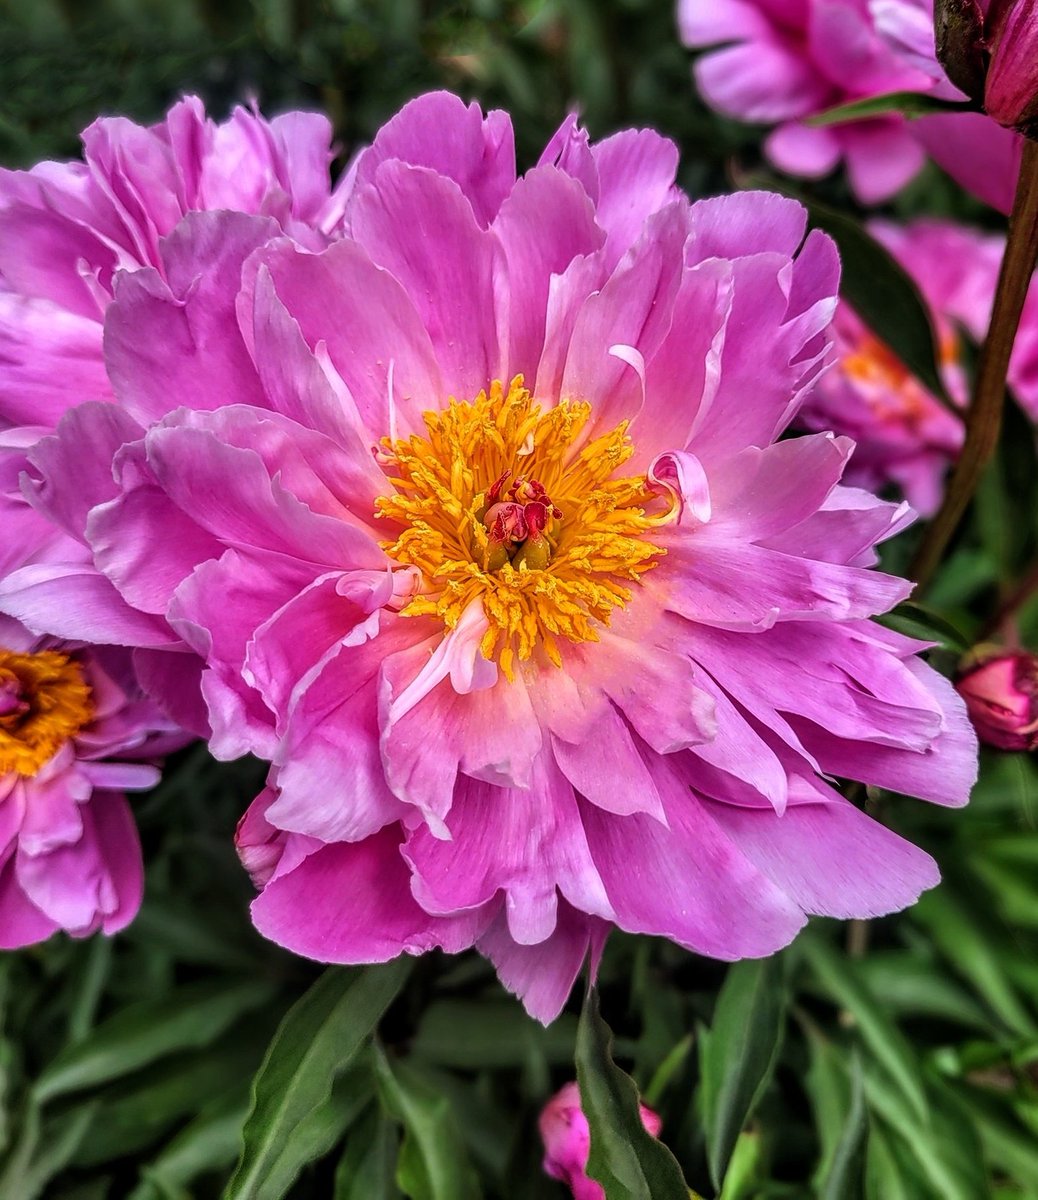 Peony season is about to begin! I couldn't be more excited!💞💞💞 Happy Mother's Day to all you beautiful Moms!😘 destinationcharming.com #flowers #garden #peonies